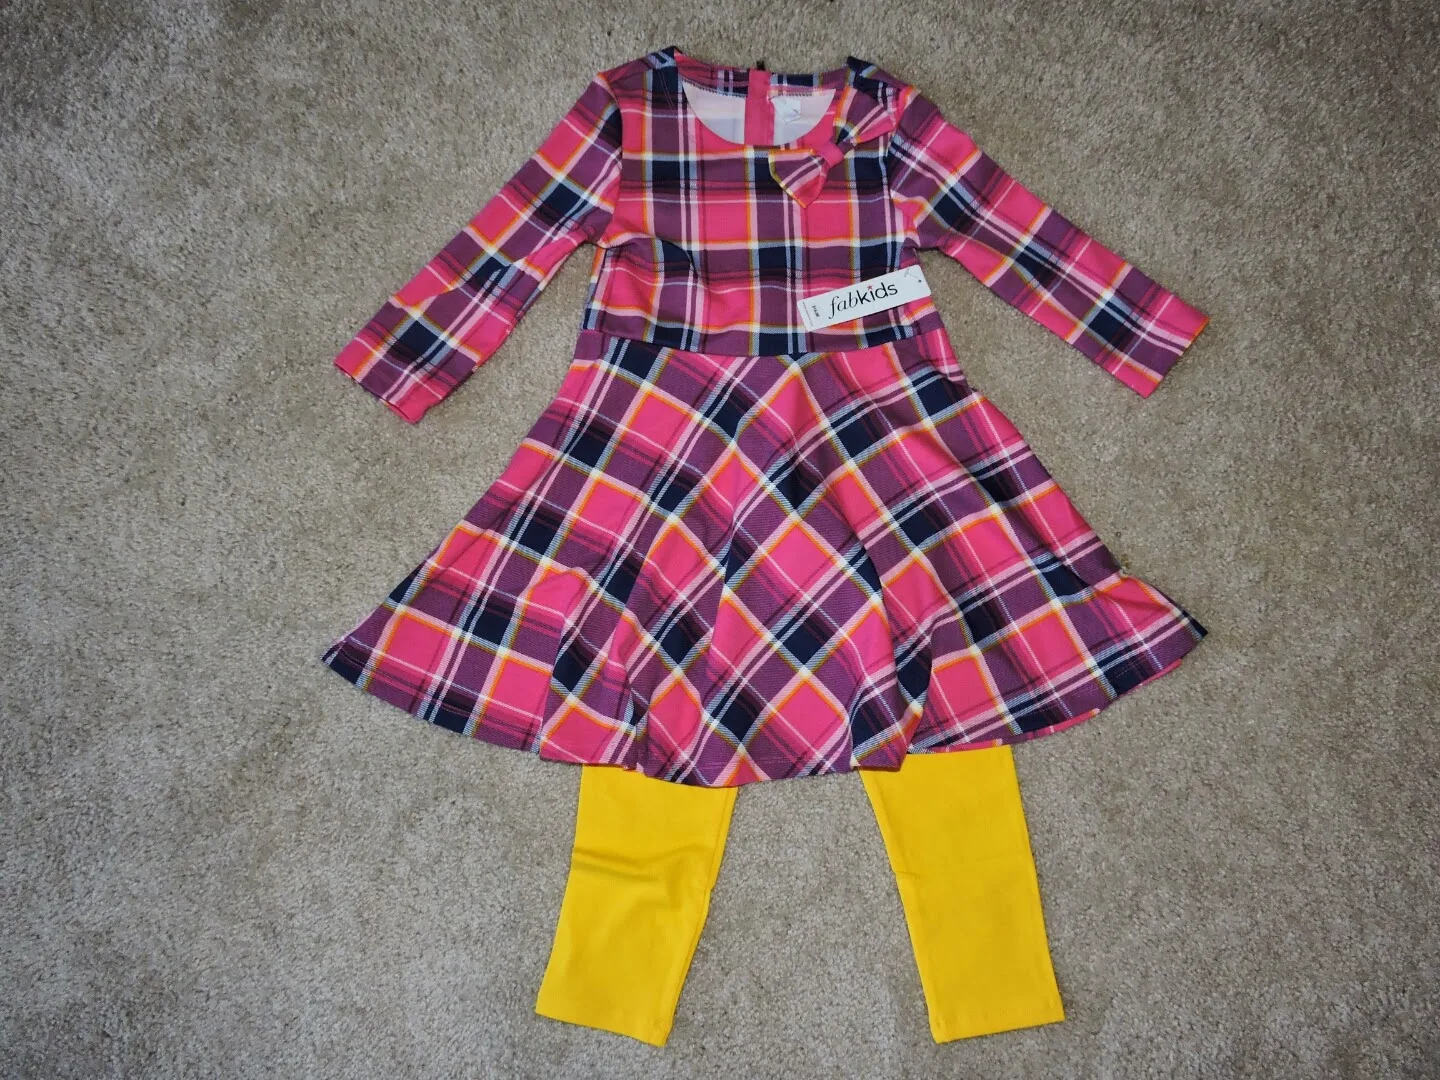 FabKids Fall Collection Review and Giveaway Ends 10/8 #LoveFabKids via www.Productreviewmom.com